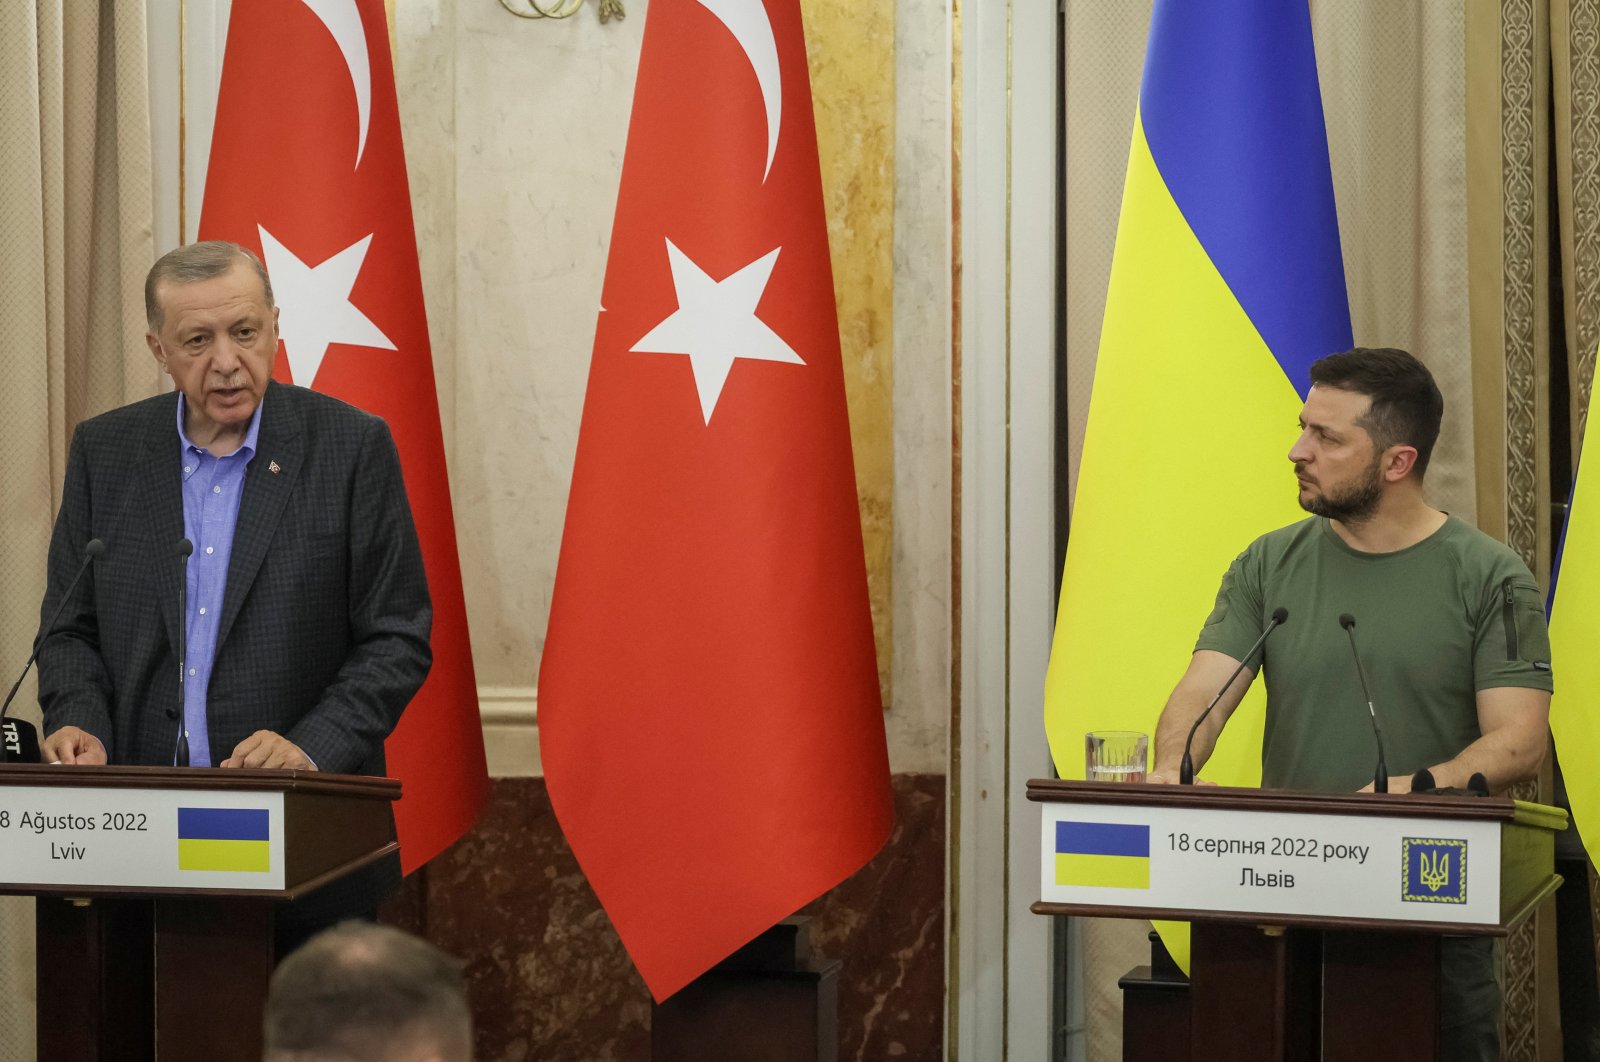 President Recep Tayyip Erdoğan (L) and Ukrainian President Volodymyr Zelenskyy (R) and U.N. Secretary-General Antonio Guterres (not pictured) attend a joint news conference following their meeting in Lviv, Ukraine, Aug. 18, 2022. (Reuters Photo)